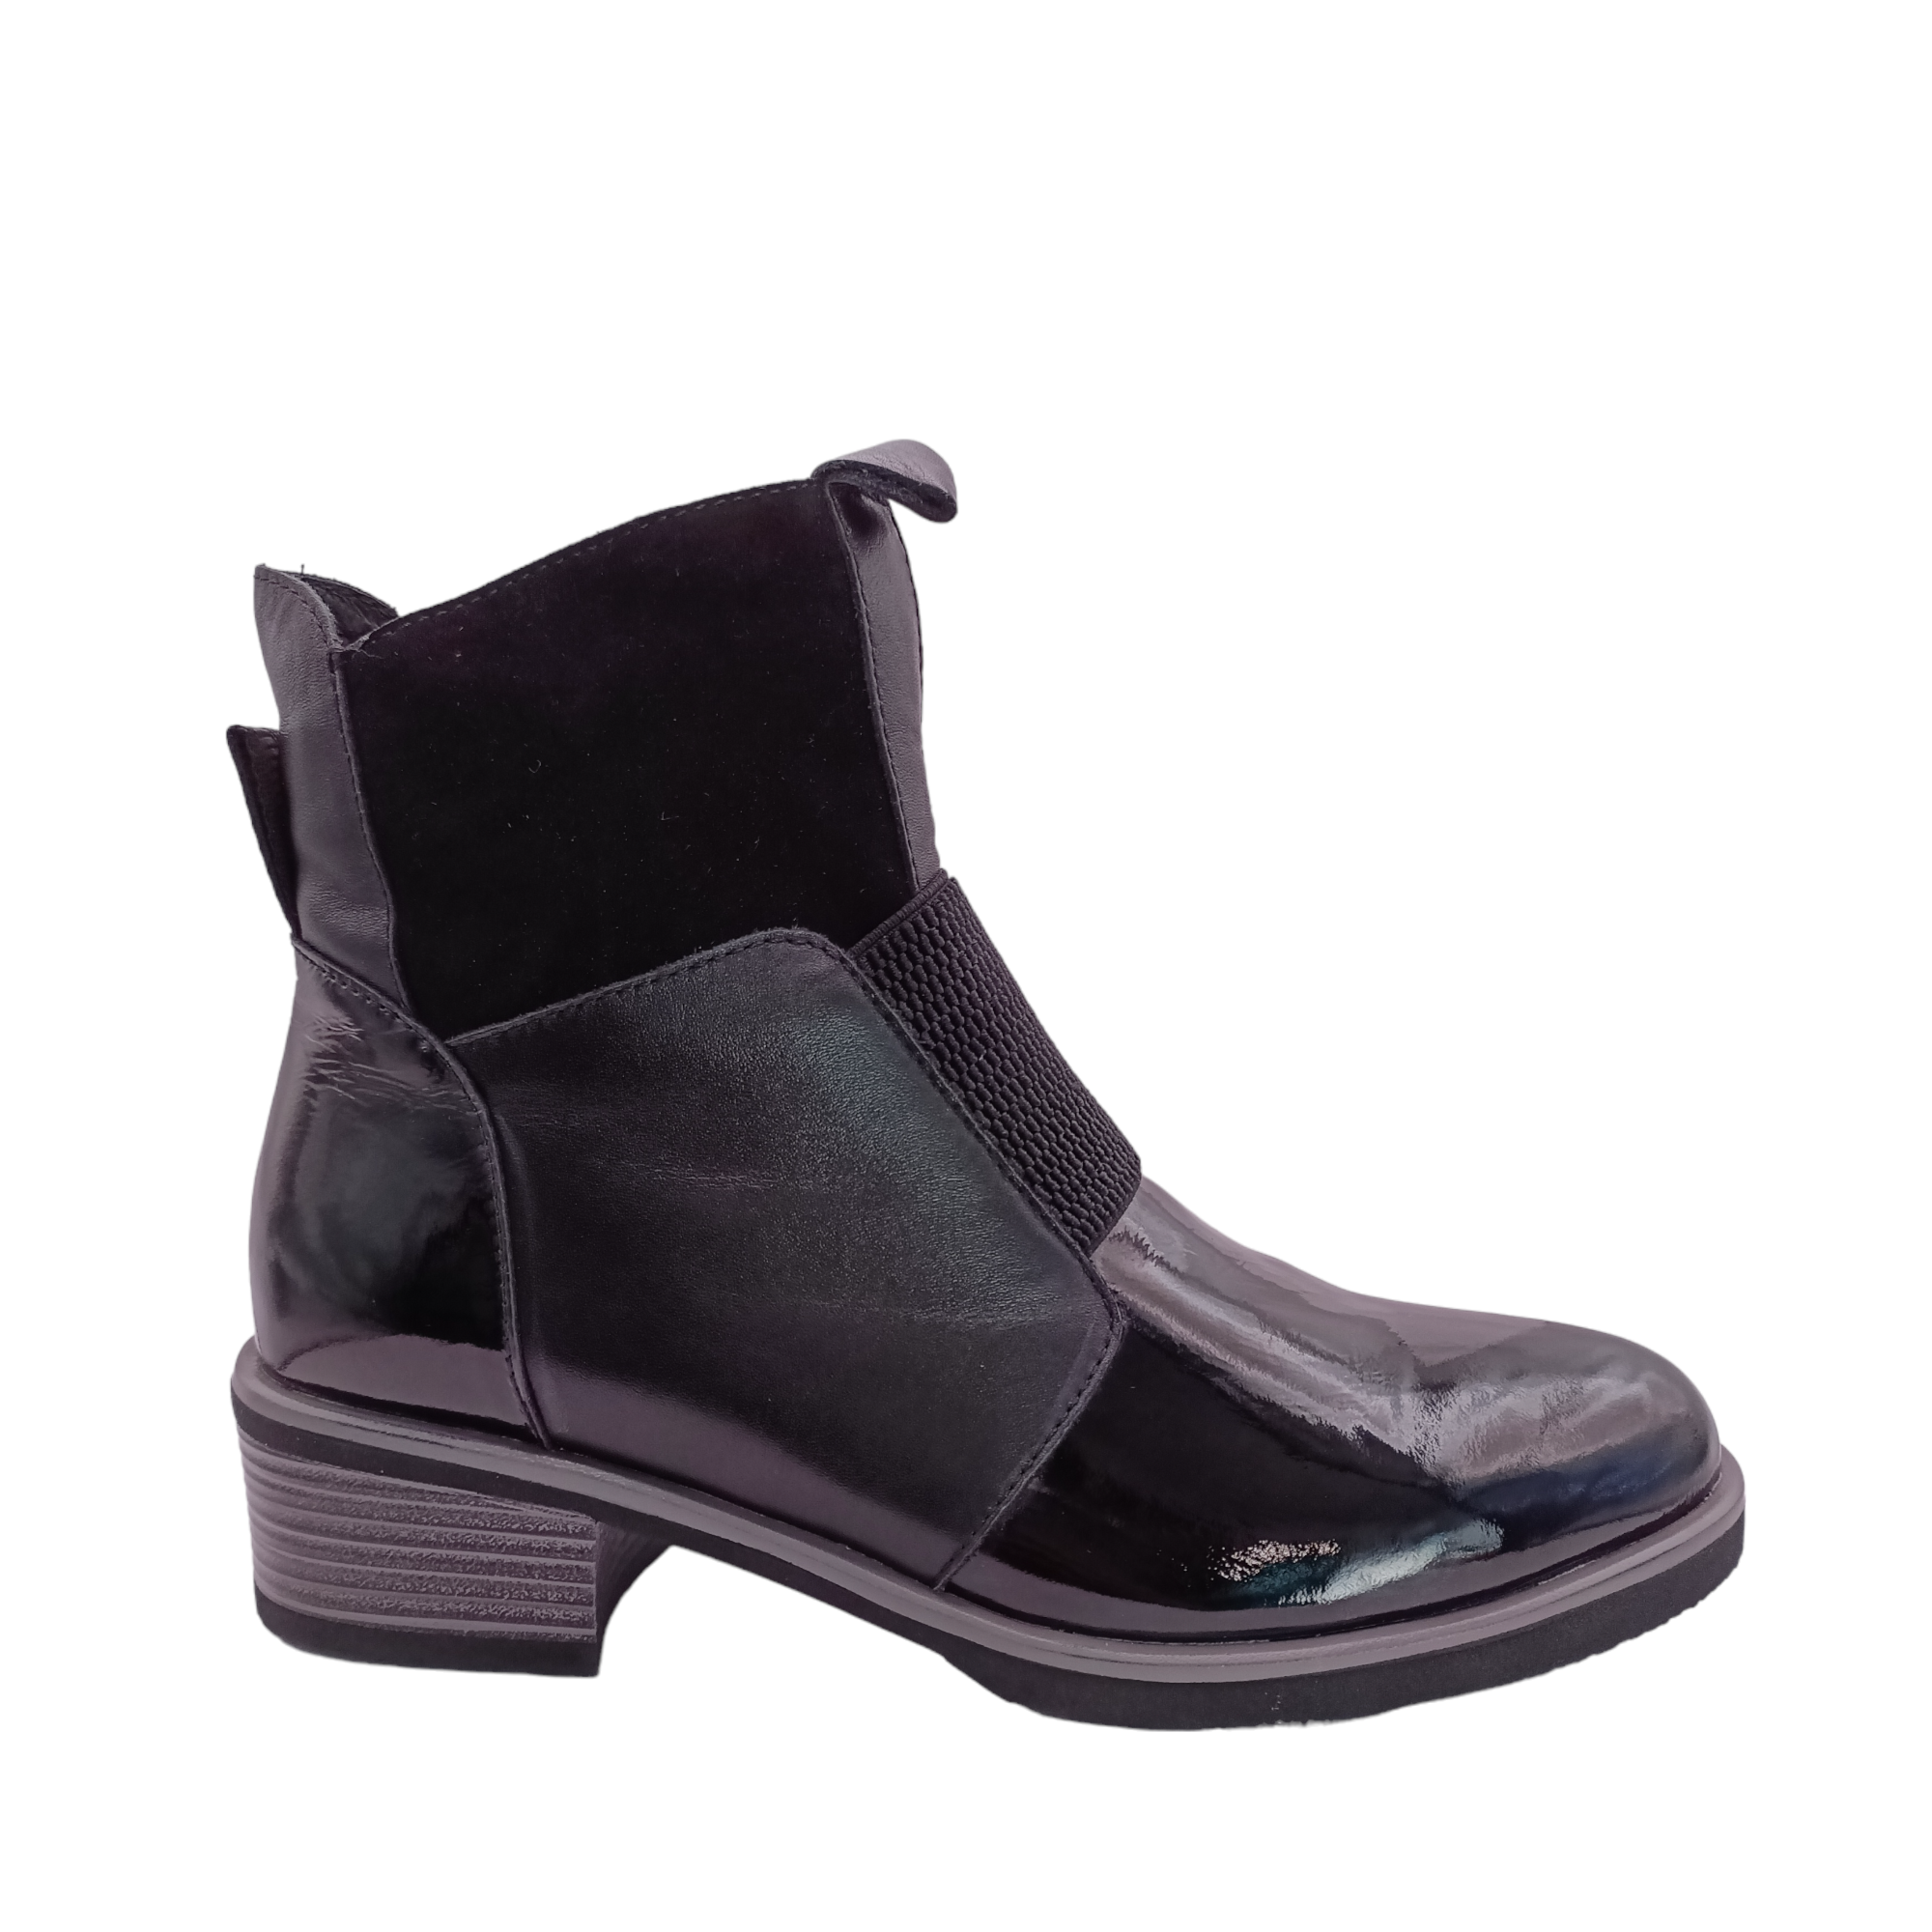 Shop Dread boot from Bresley. Outer side view of Black patent leather on the toe and the back heel. suede pieces of leather around the top of the boot. leather pieces on the sides. side zip and a gusset over the front. shoe&amp;me Mount Maunganui